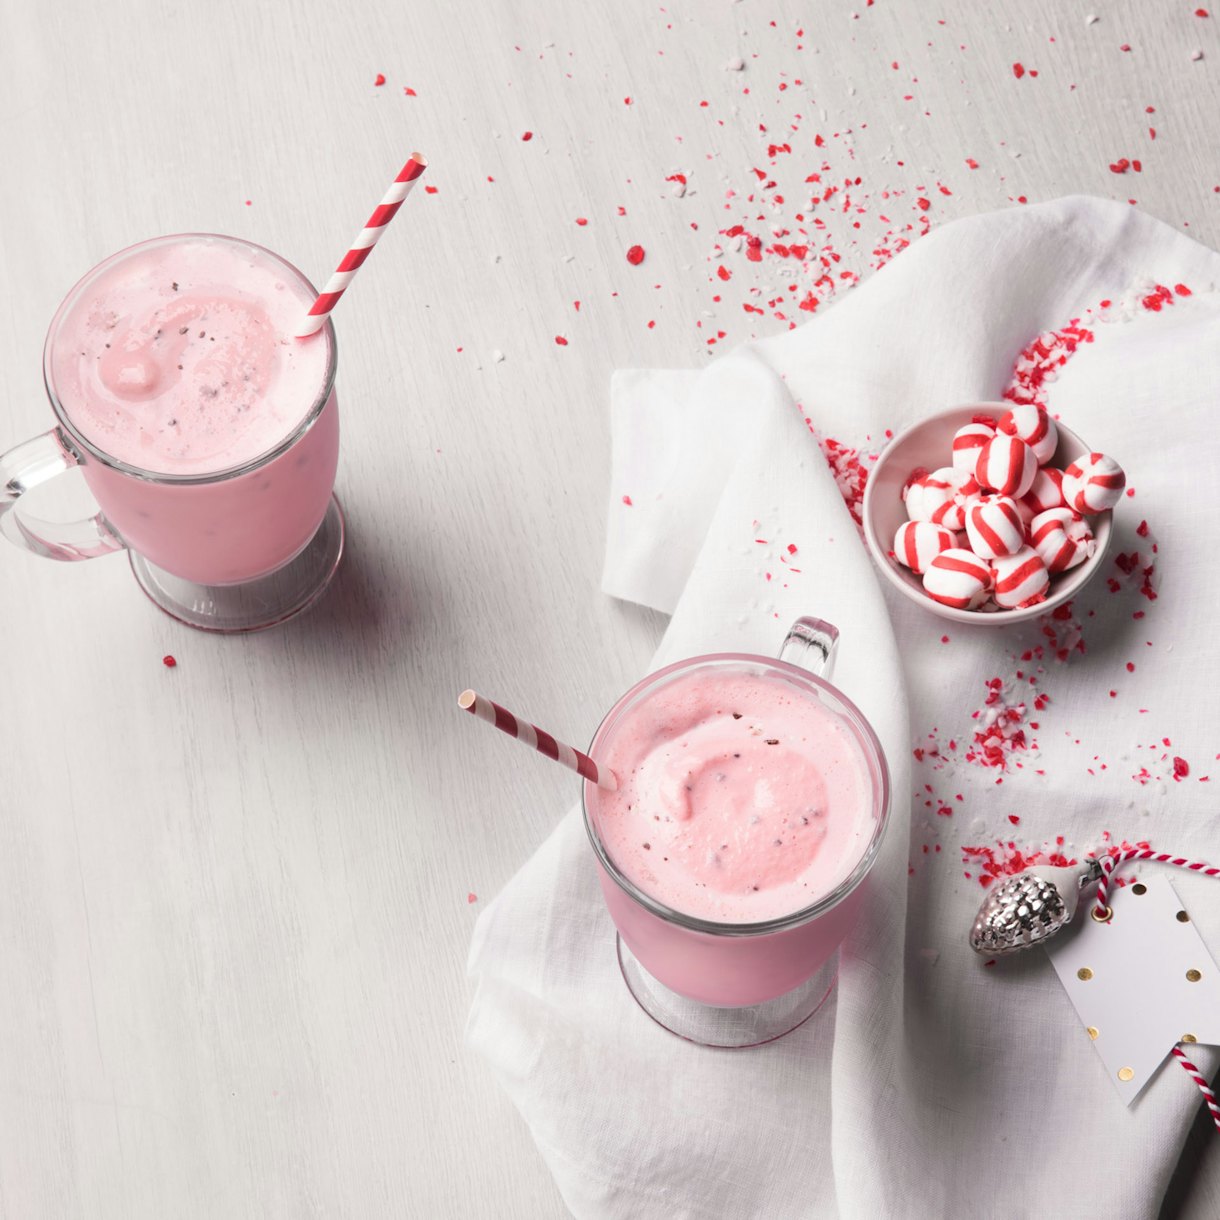 How Long Is ChickFilA's Peppermint Chocolate Chip Milkshake Available